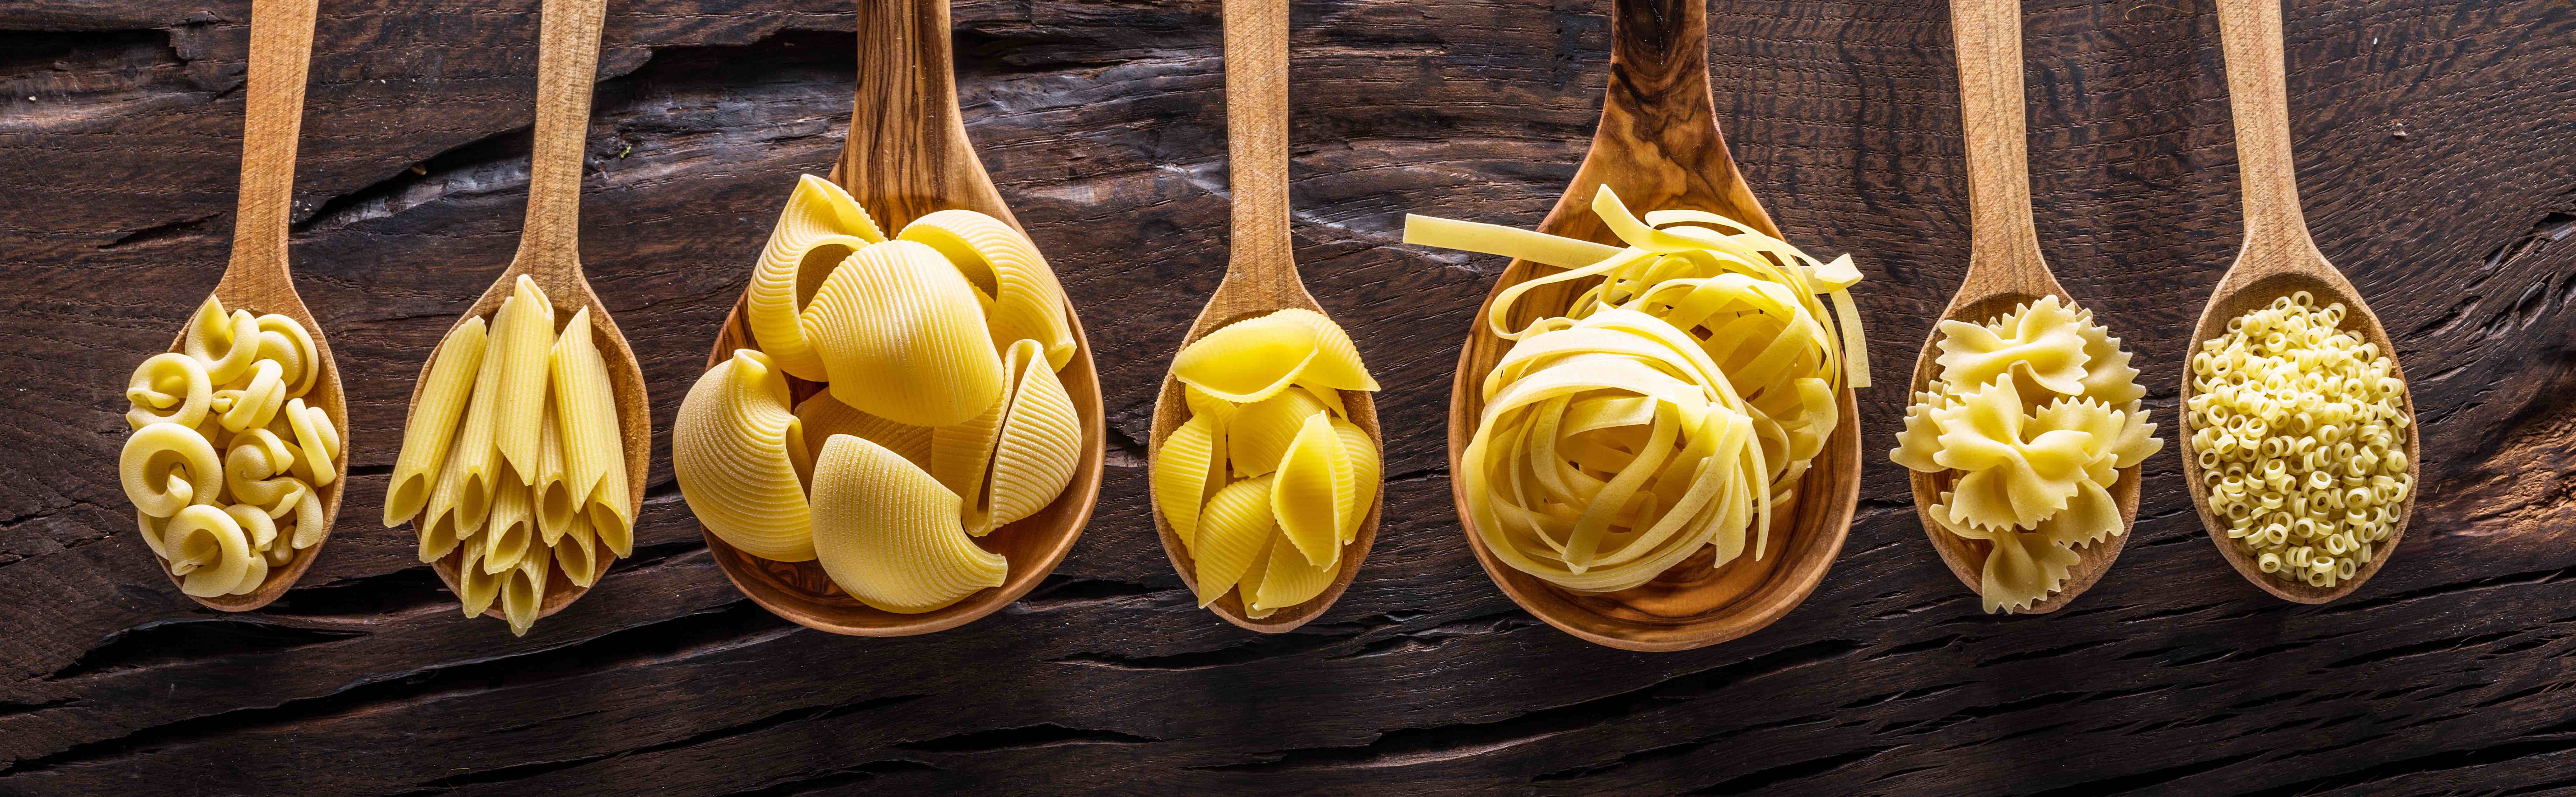 Types Of Pasta And Their Best Pairing Sauces Facts Net